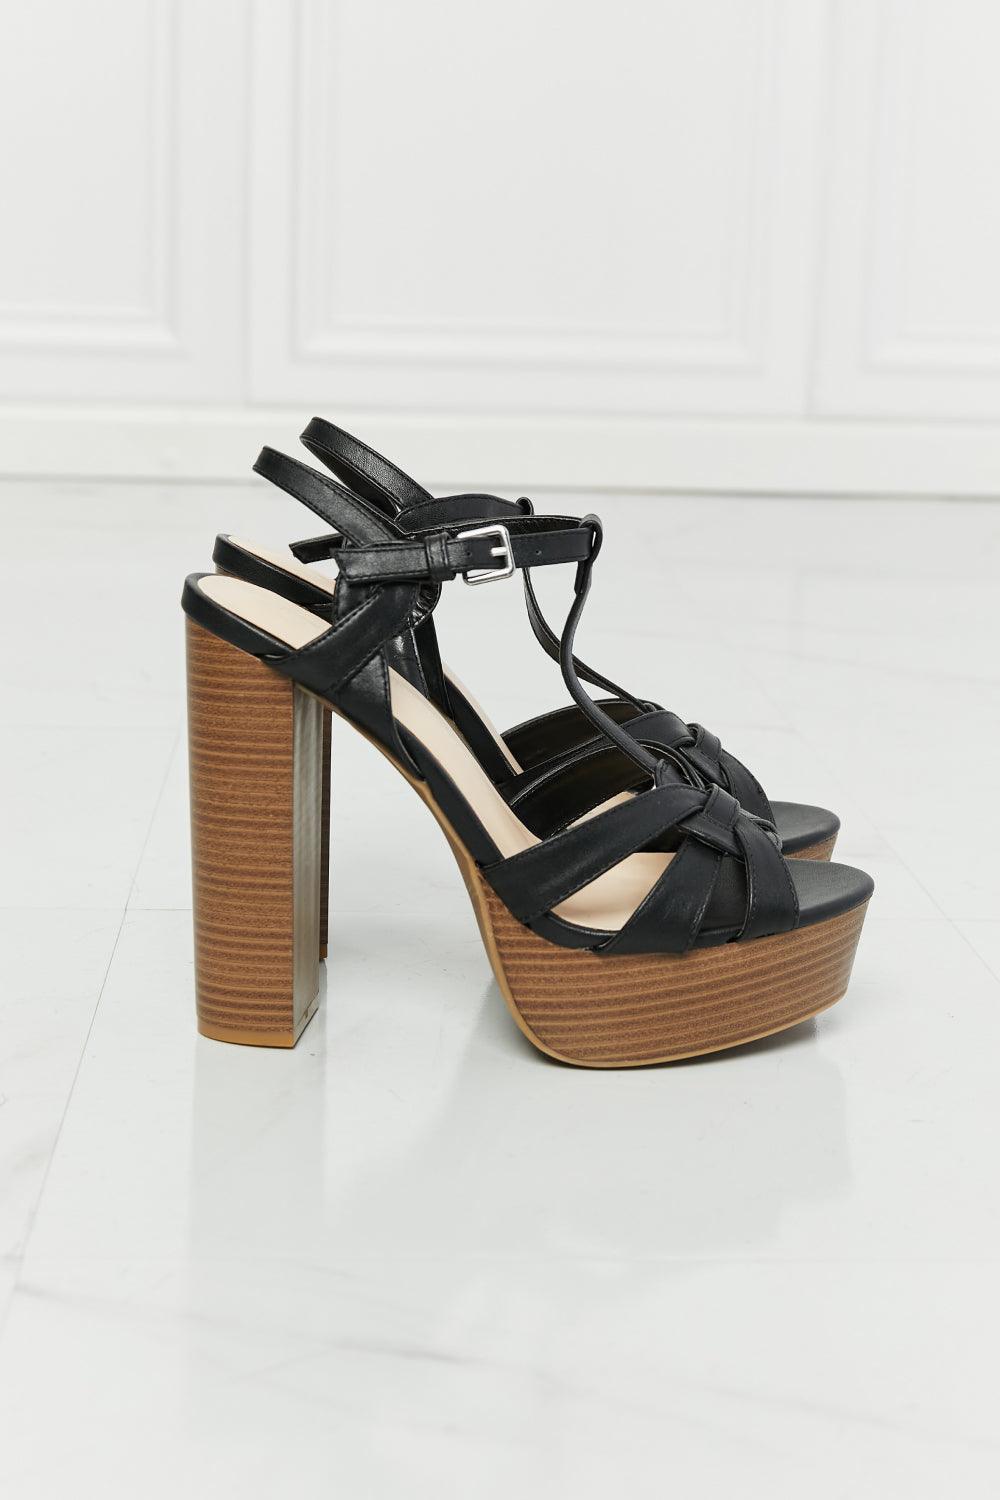 Legend She's Classy Strappy Heels - CADEAUME